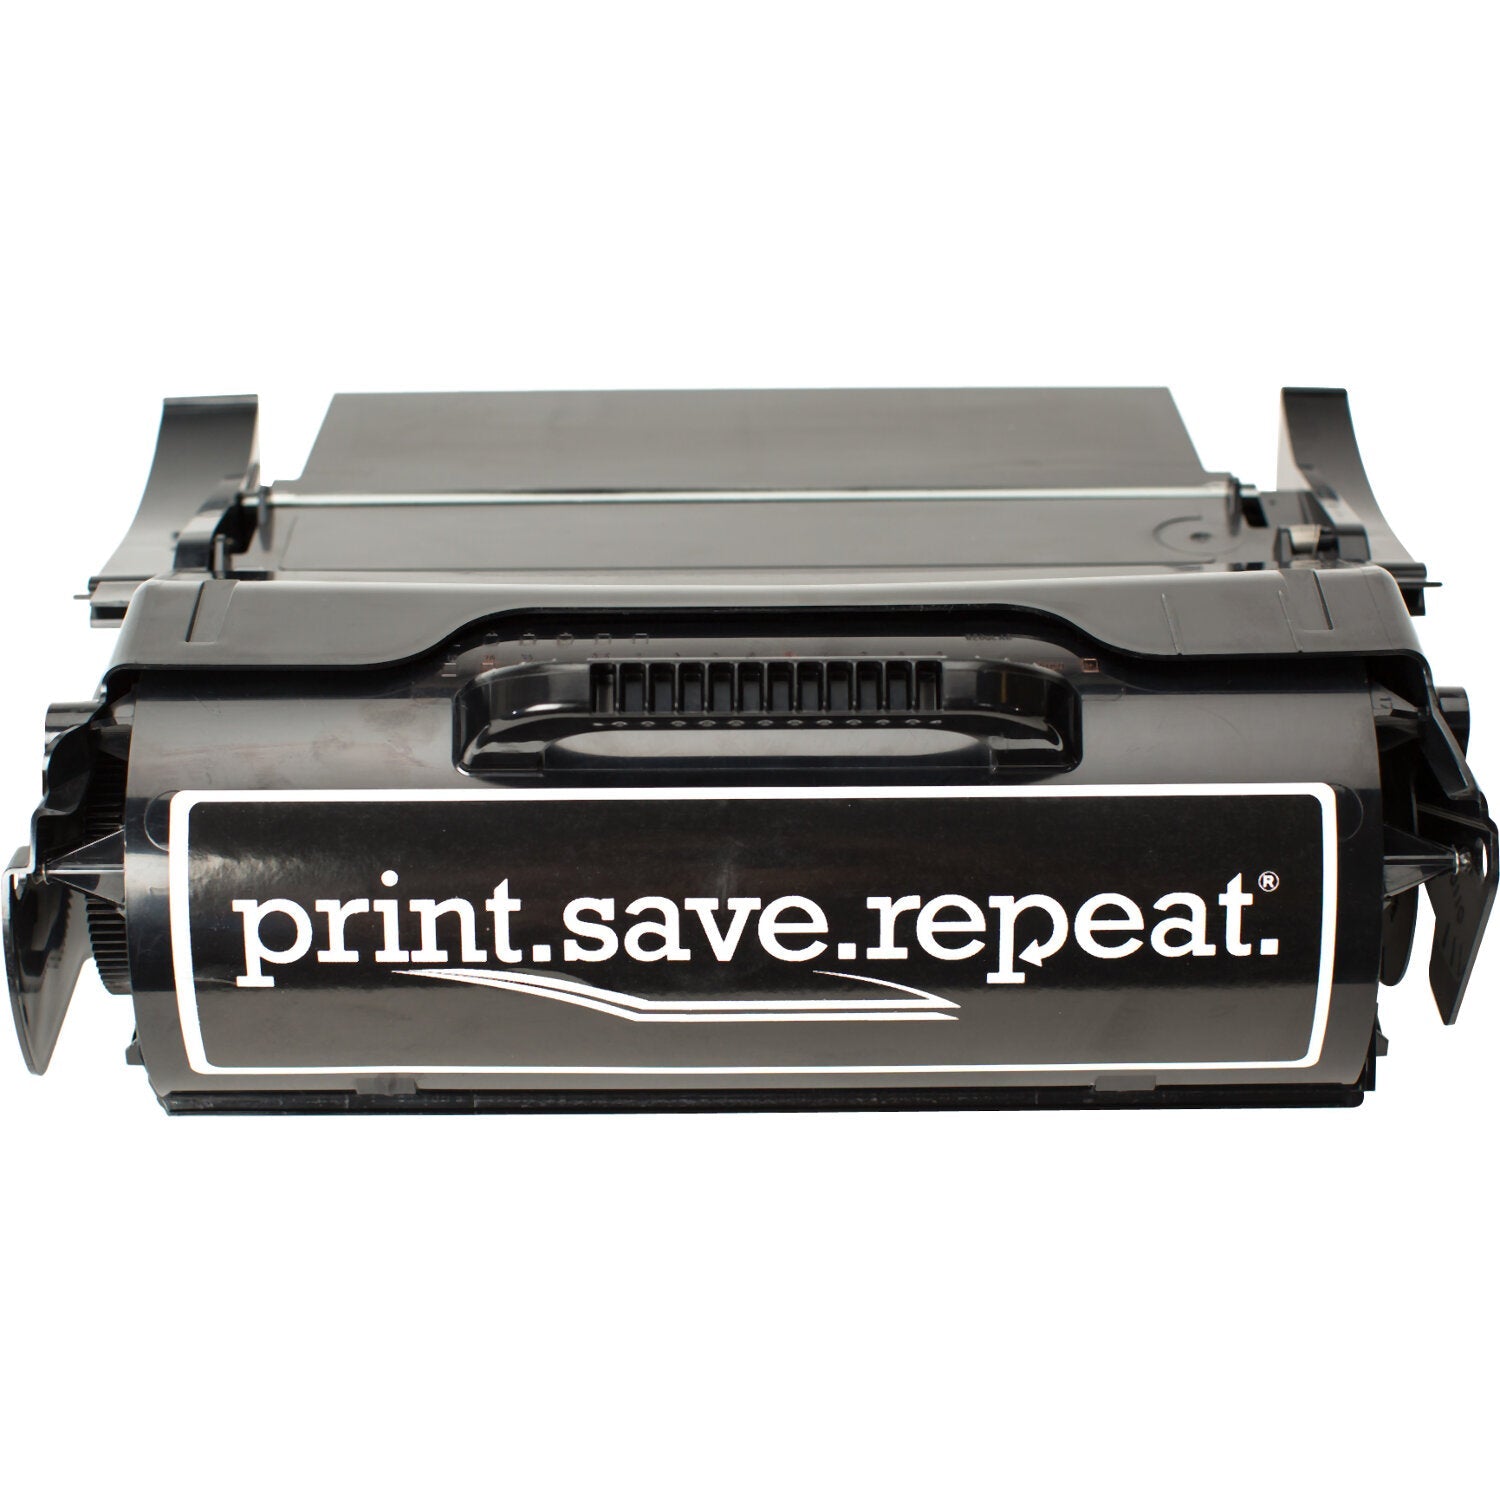 Print.Save.Repeat. Lexmark T650H80G High Yield Remanufactured Toner Cartridge for T650, T652, T654, T656 [25,000 Pages]